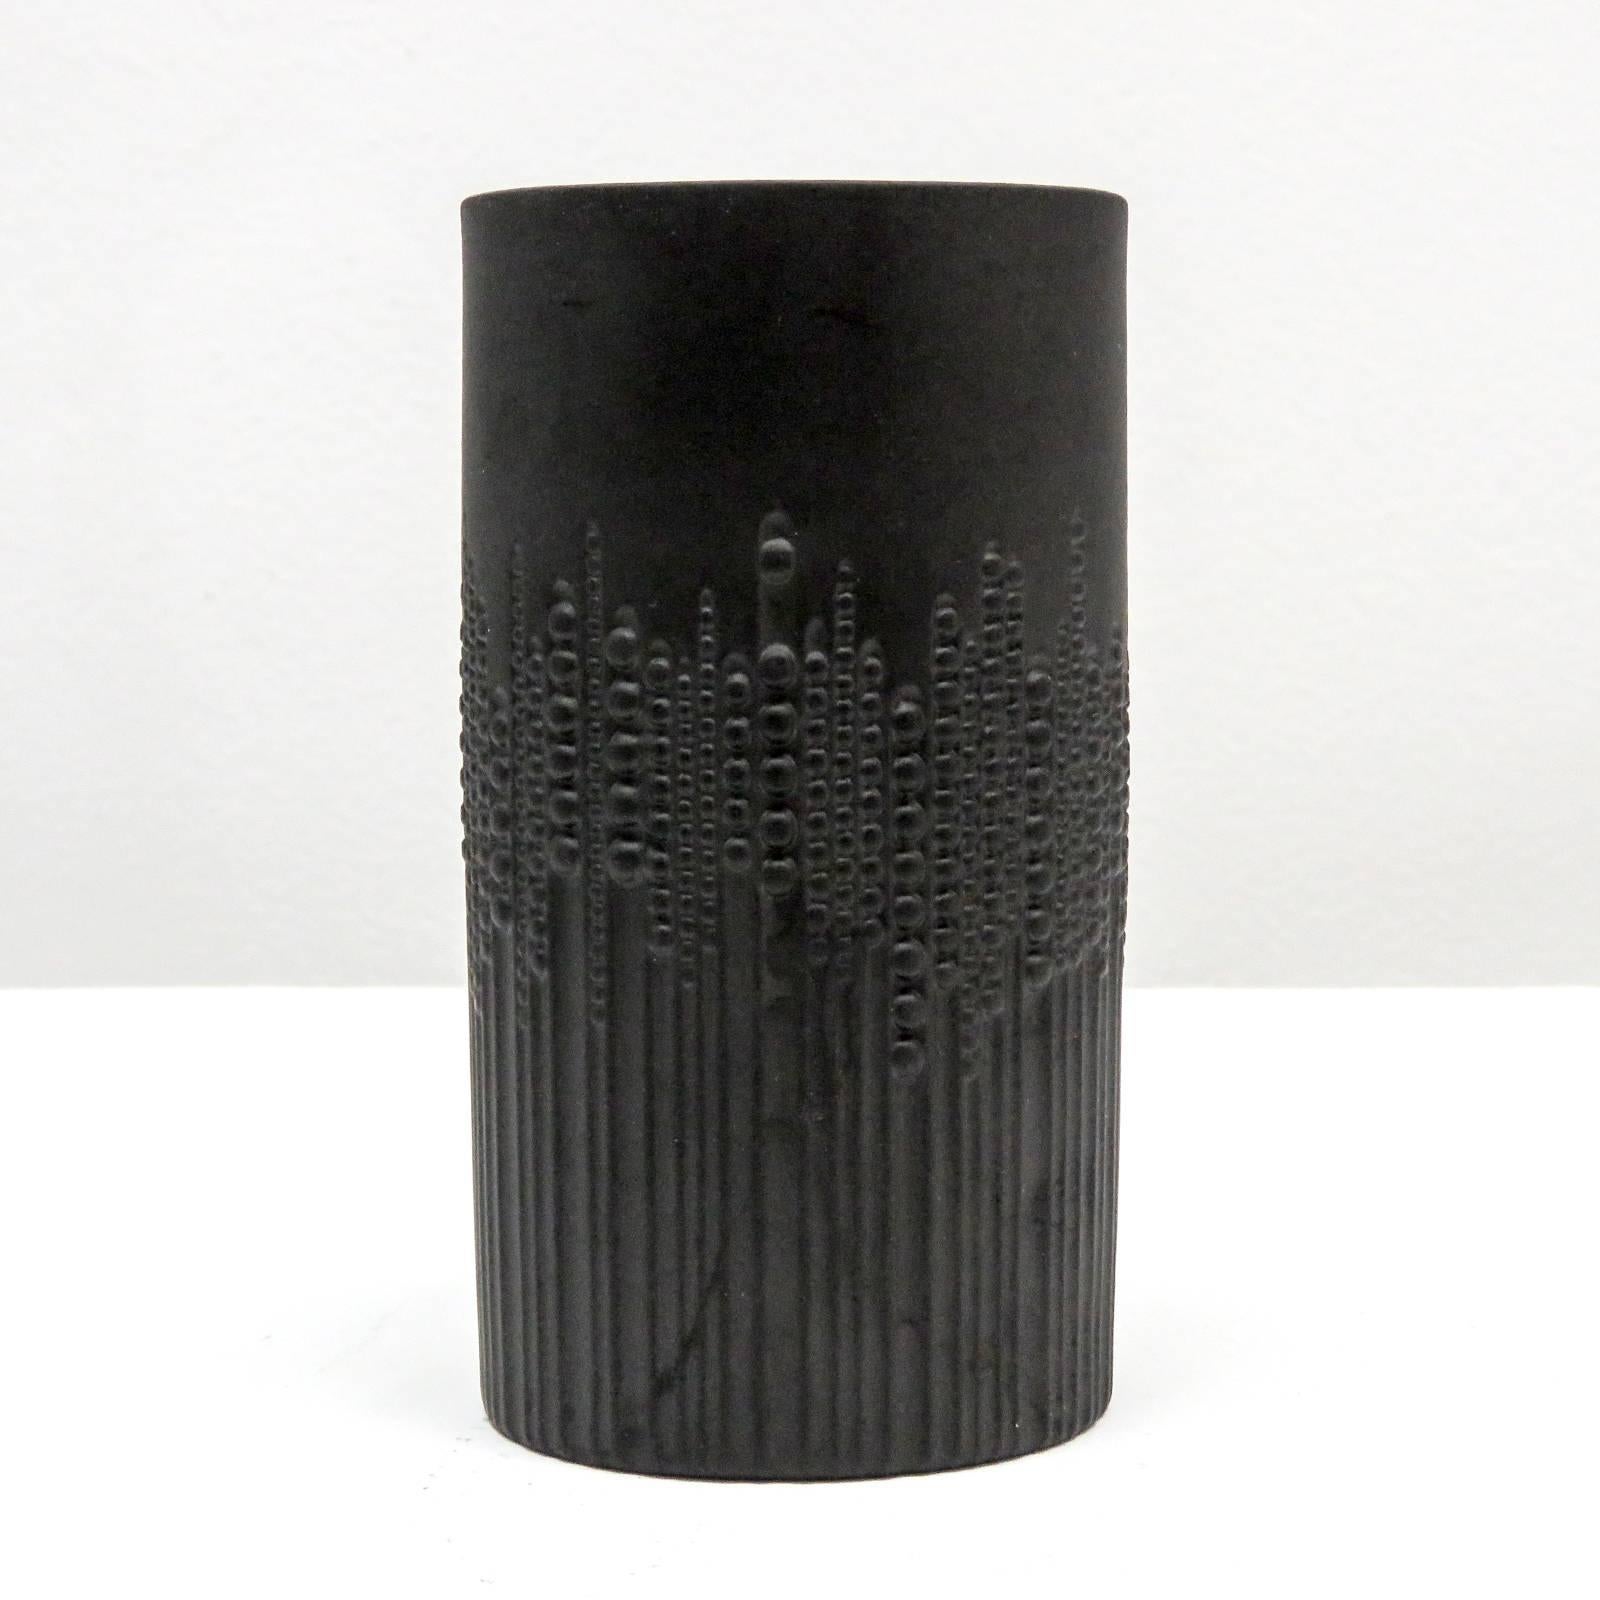 Stunning cylindrical black matte porcelain vase designed by Tapio Wirkkala for Rosenthal/Siemens, with sublime relief of beaded pearls running down vertical lines, gives an impression of movement, marked.